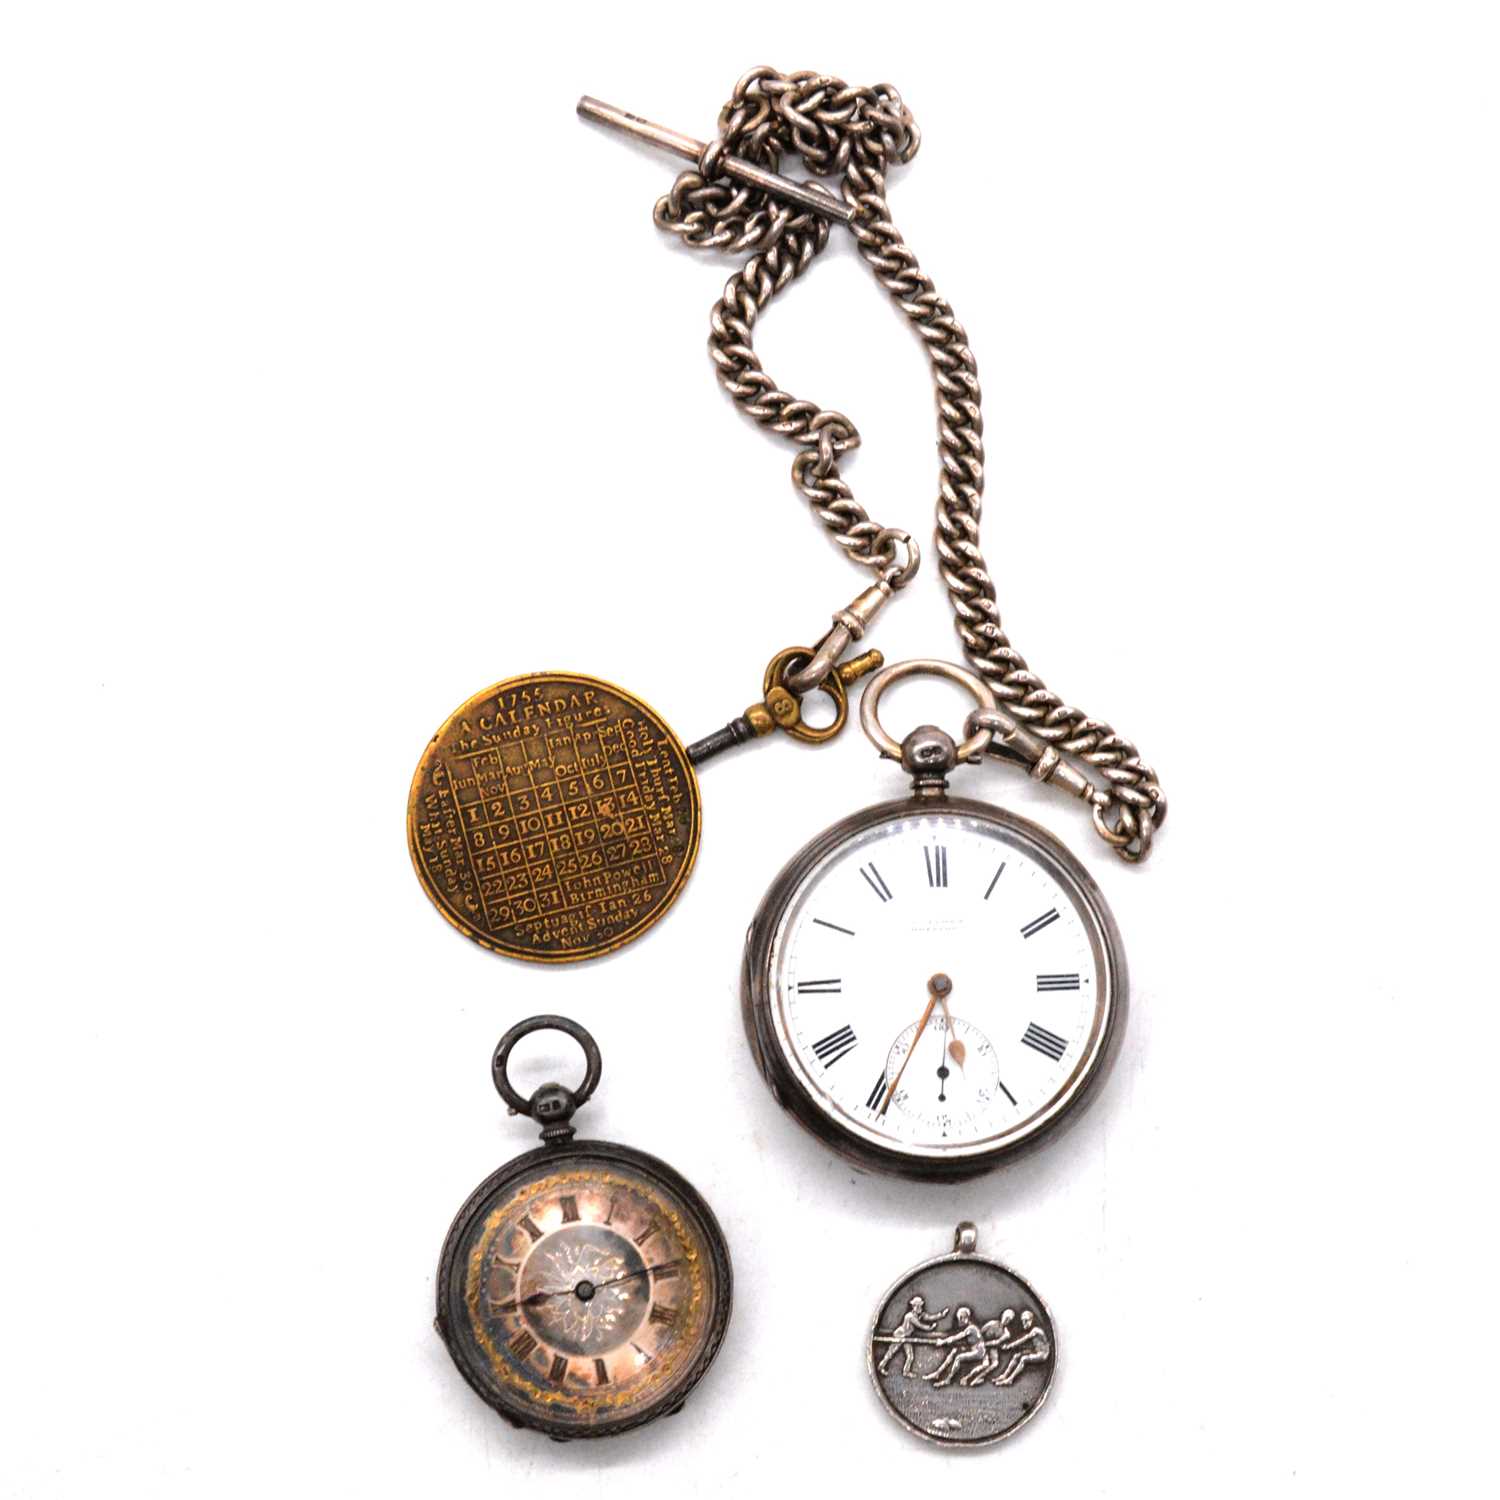 Two silver open face pocket watches, a silver double Albert watch chain, medal and brass calendar.